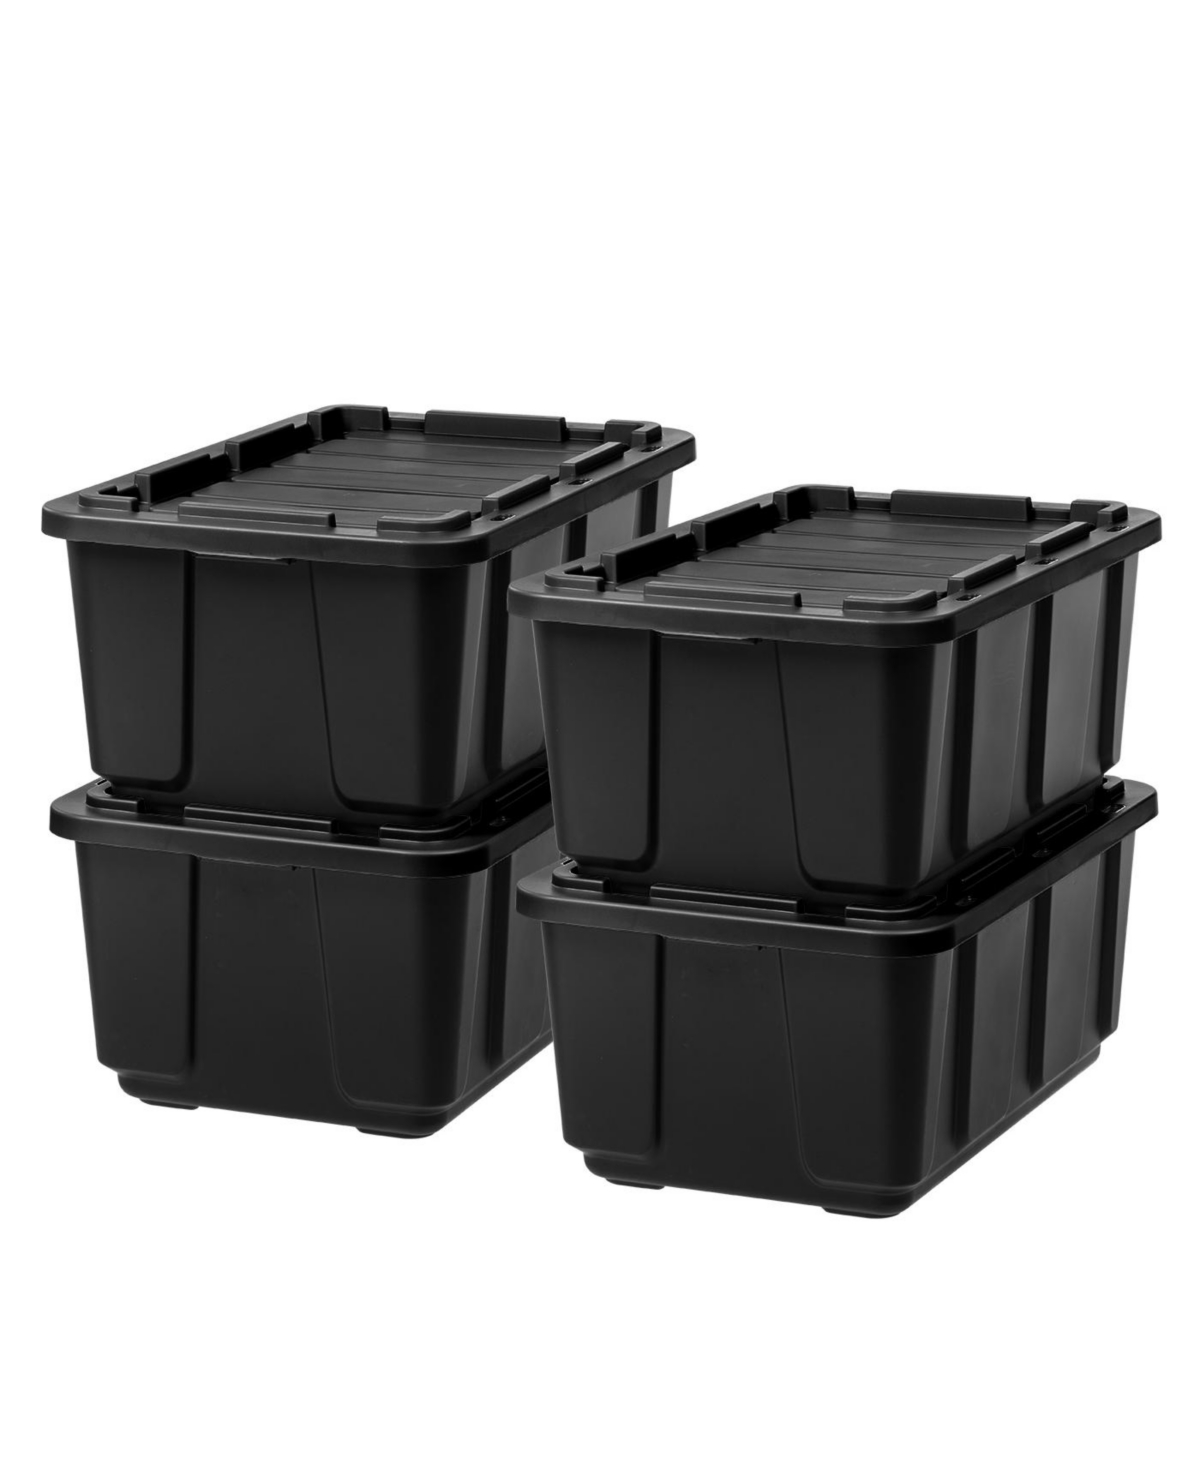 27Gal/108Qt 4 Pack Large Heavy-Duty Storage Plastic Bin Tote Container with Durable Lid, Black/Black - Black